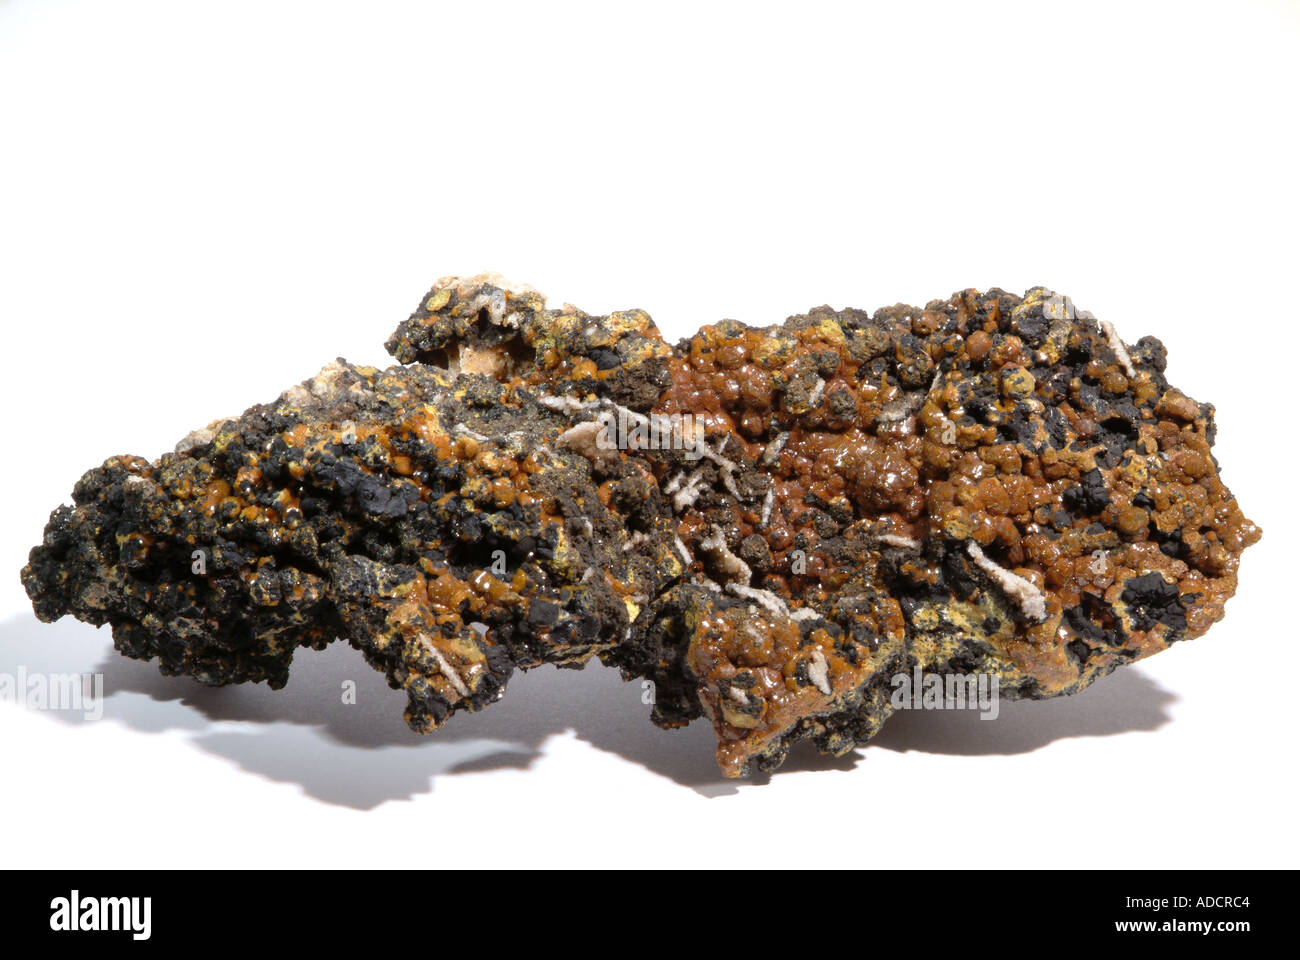 Mineral Mimetite, Varient Campylite, Campylite mass with quartz memranes partially coated in a black maganese oxide. Crystals orange and barrel shaped, Dry Gill mine, Caldbeck Fells, Cumbria, England Stock Photo